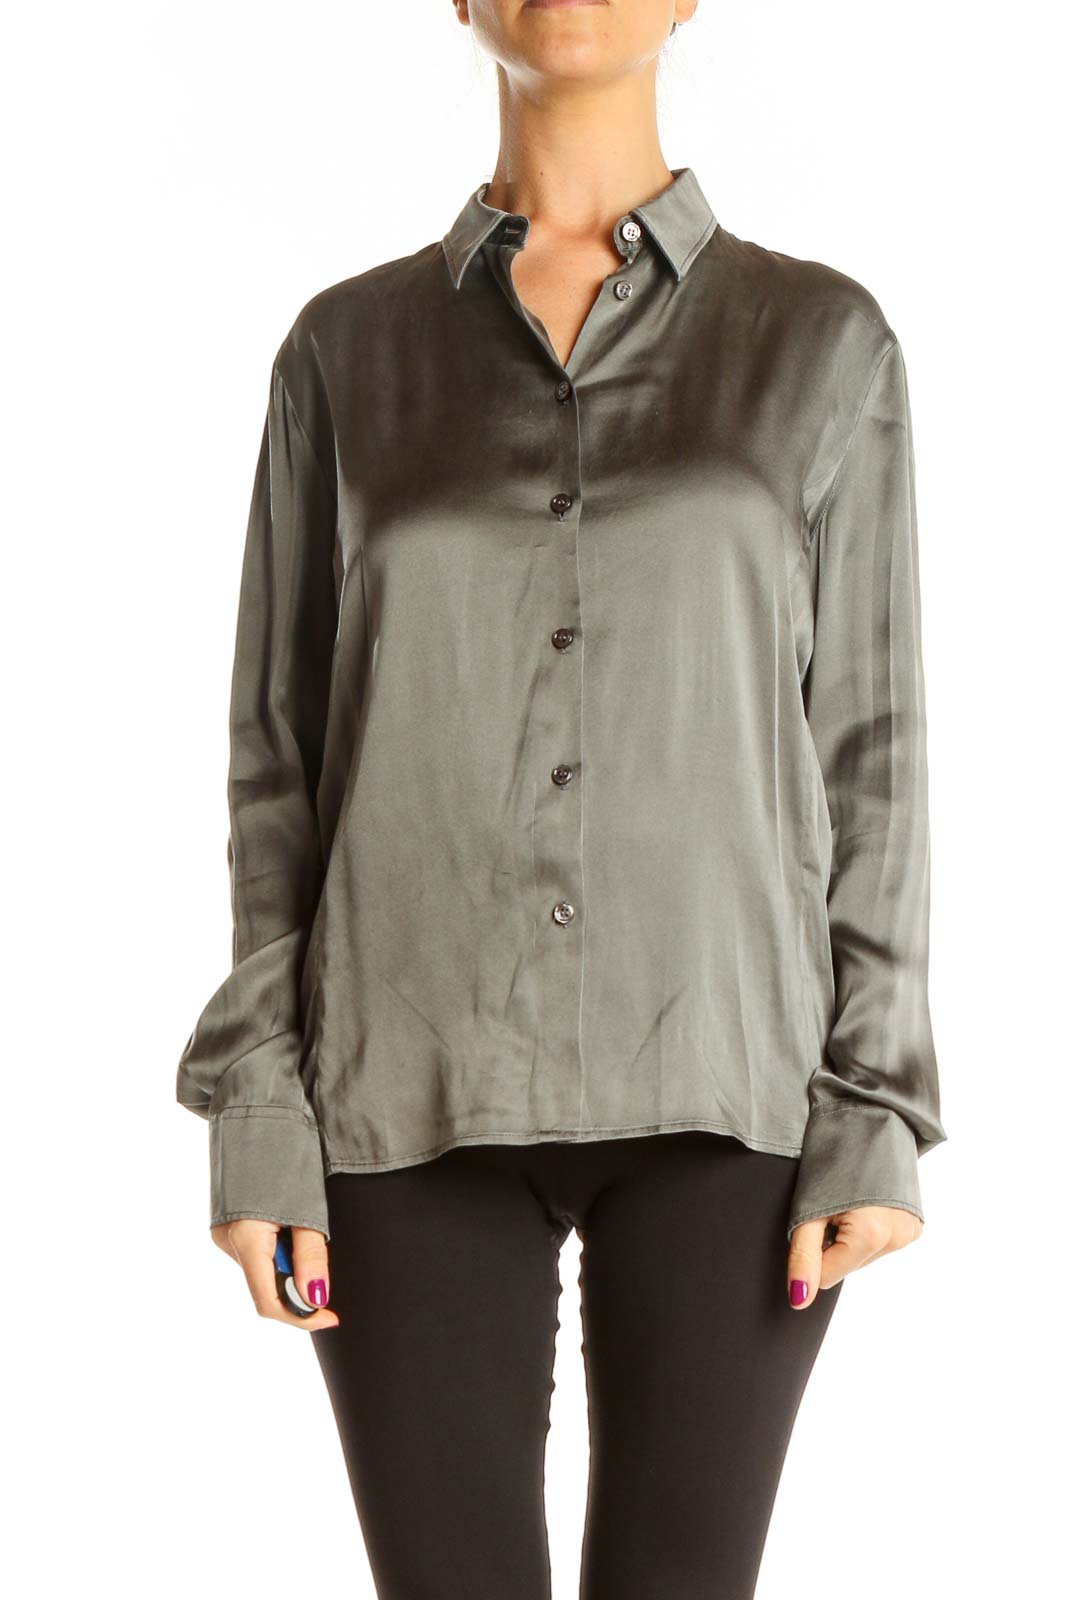 Gray Formal Top Front